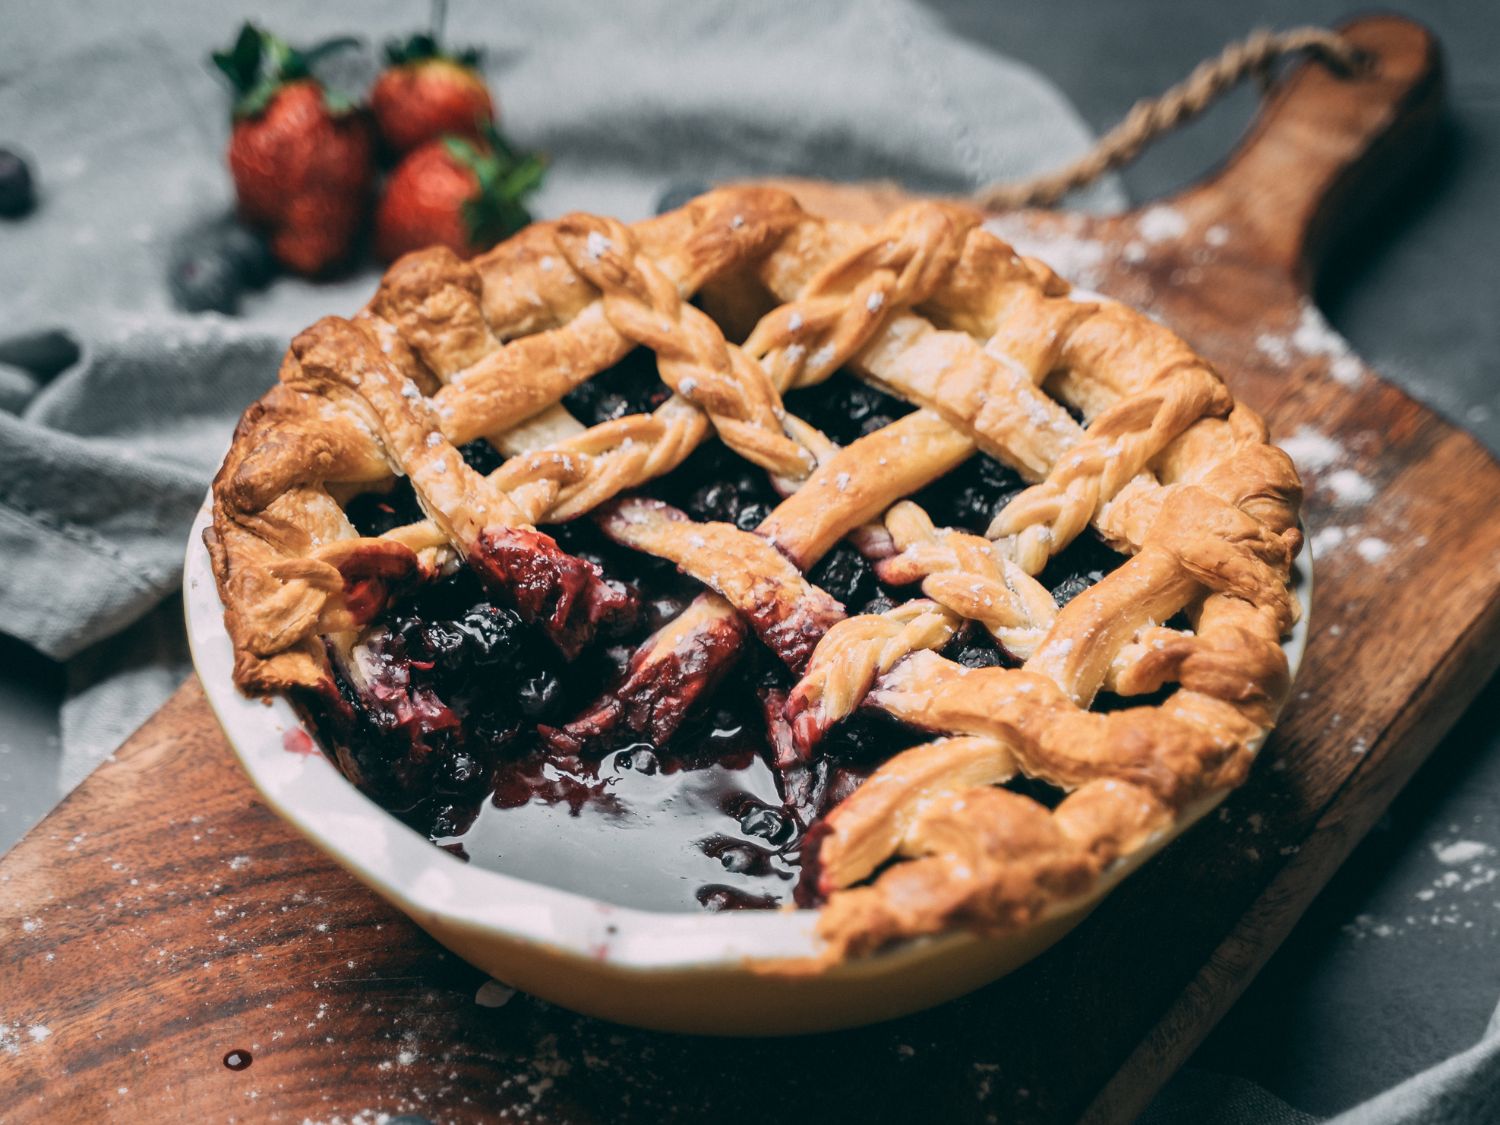 A blueberry pie with a cross hatch pattern sitting on a wooden background. Strawberries sitting on the side.